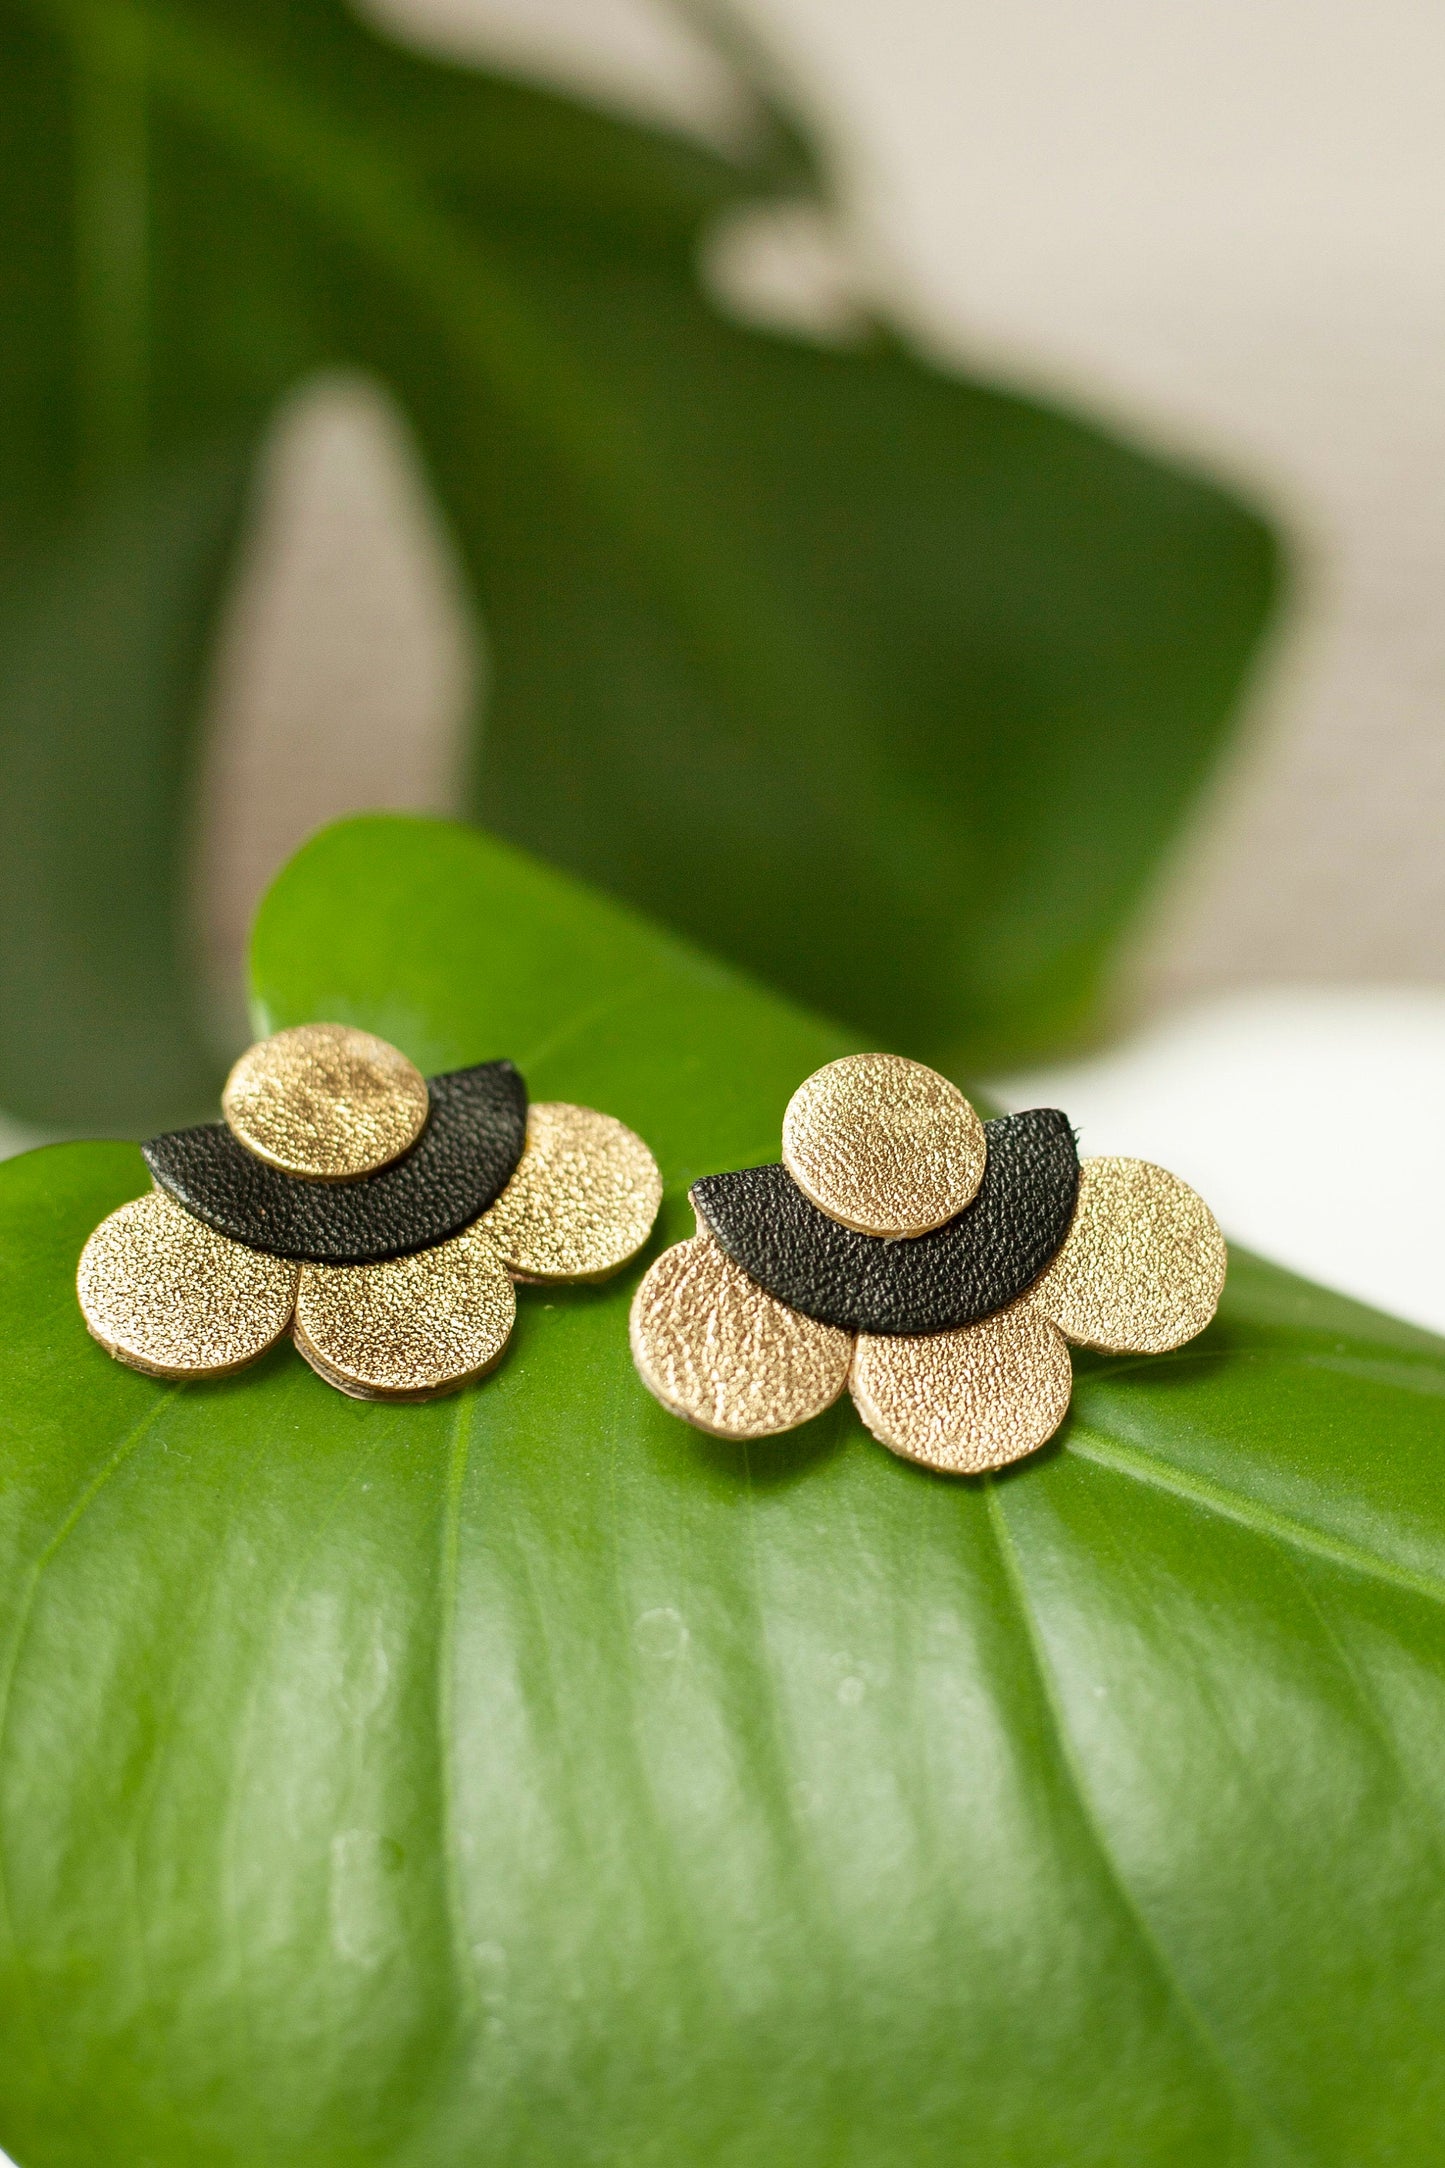 Gold and black leather flower stud earrings